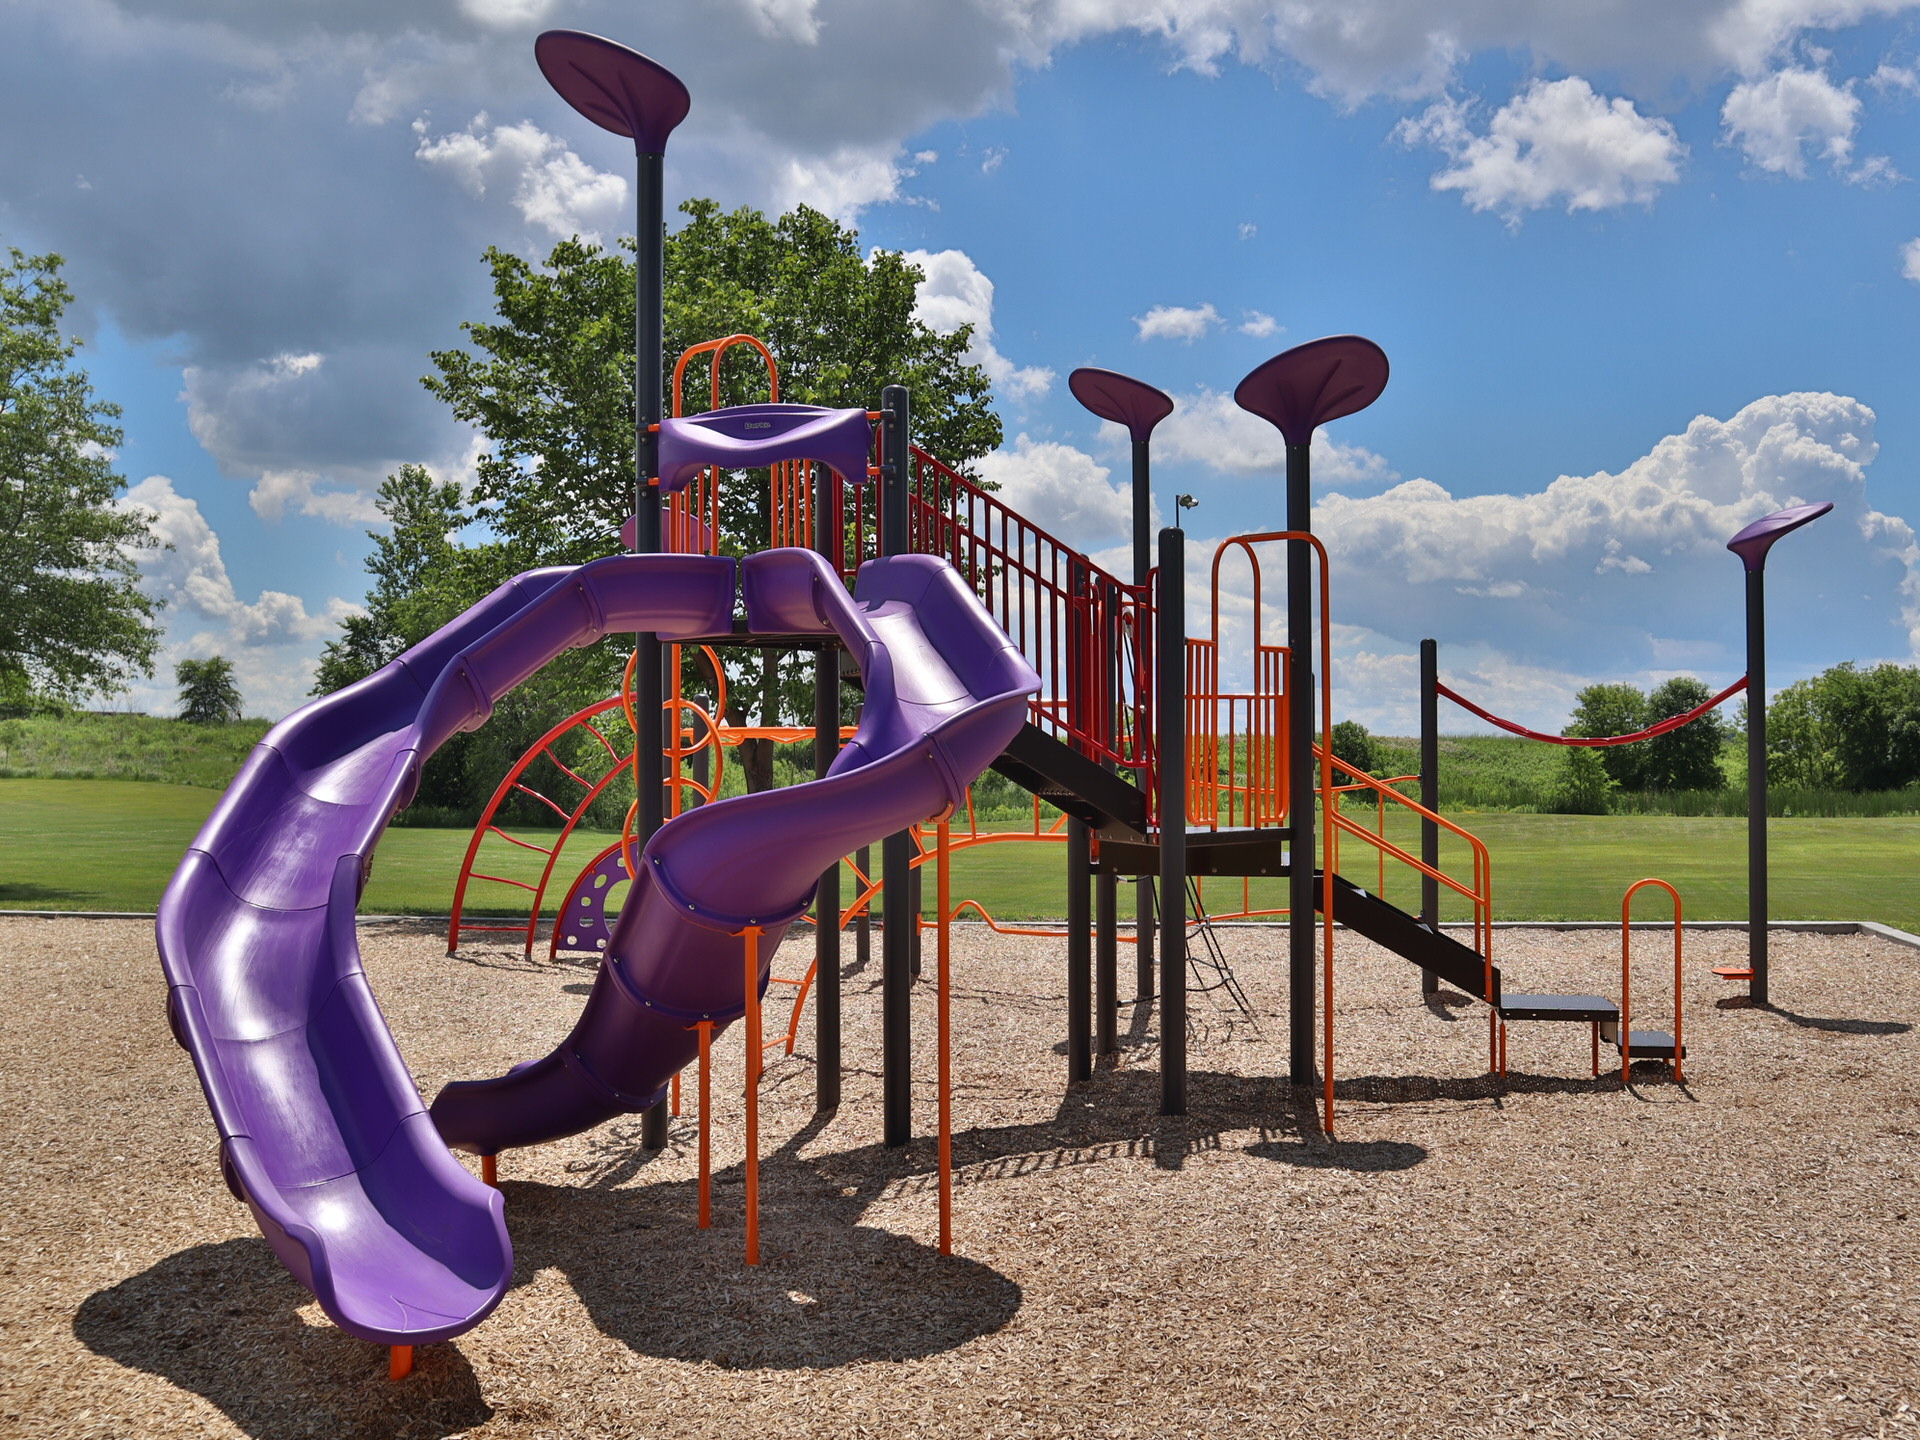 Minnesota City Playground at Cherry View Park in Lakeville, MN